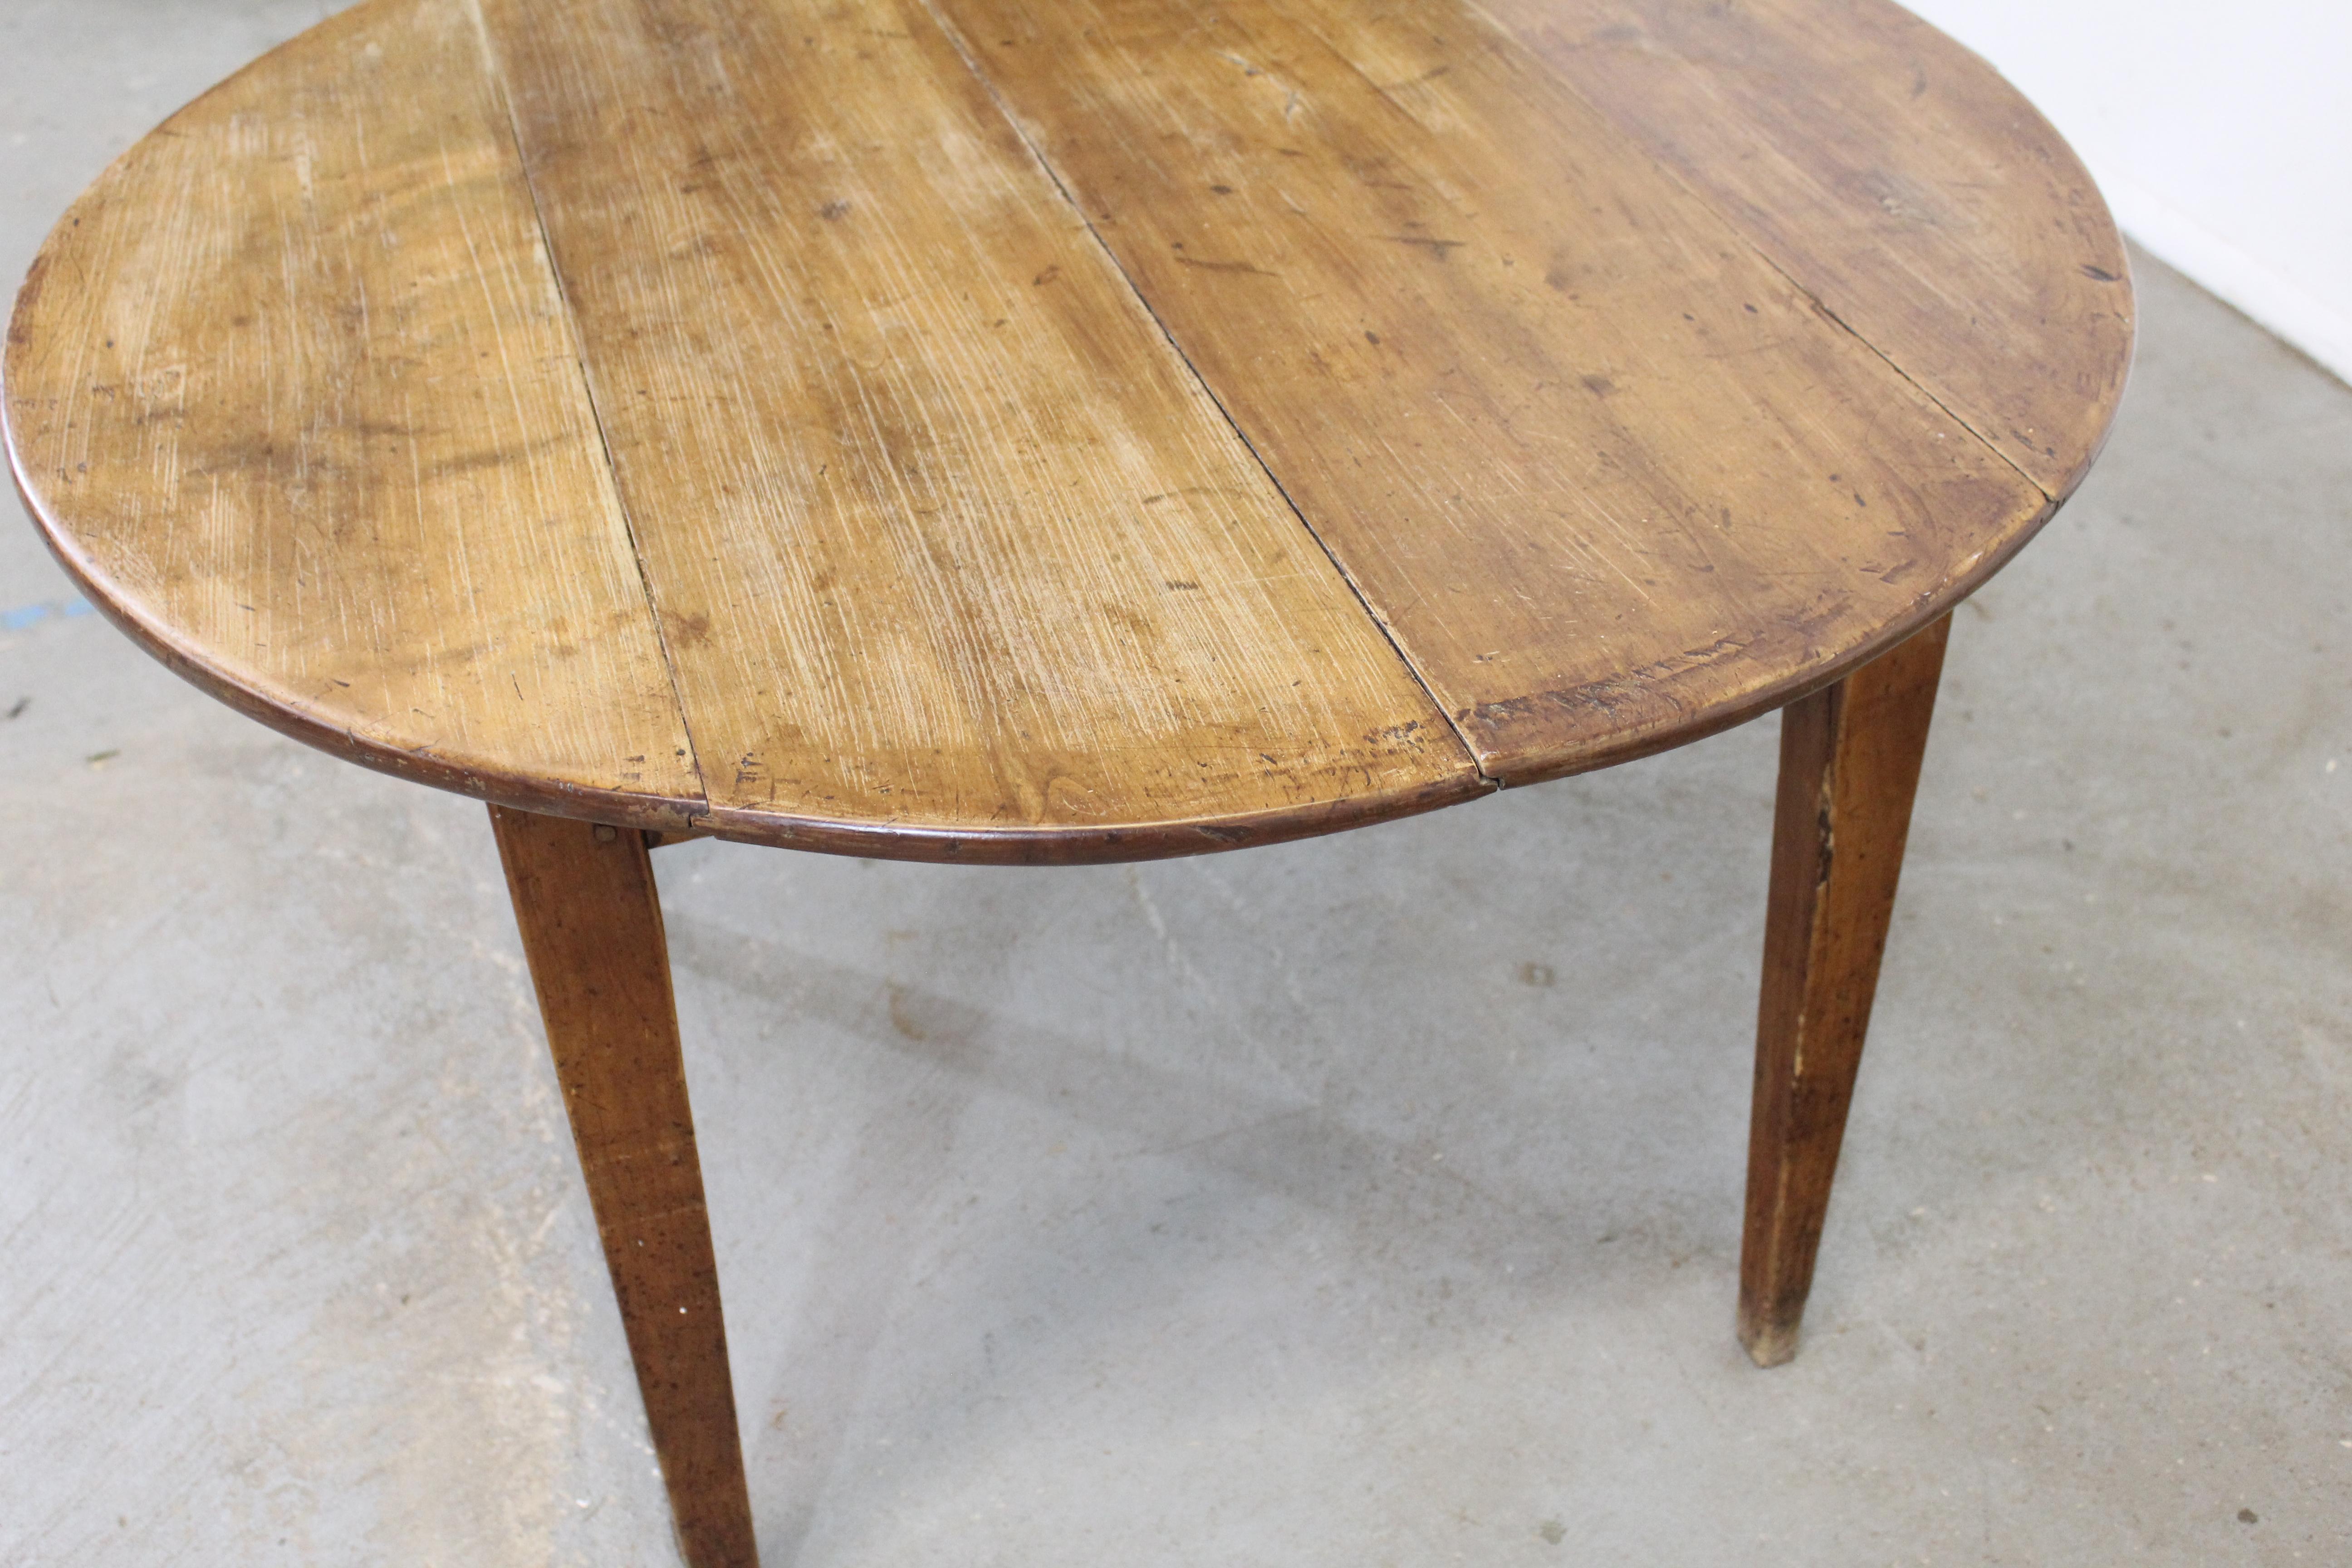 Wood Antique French Country Rustic Round Farm Dining Table